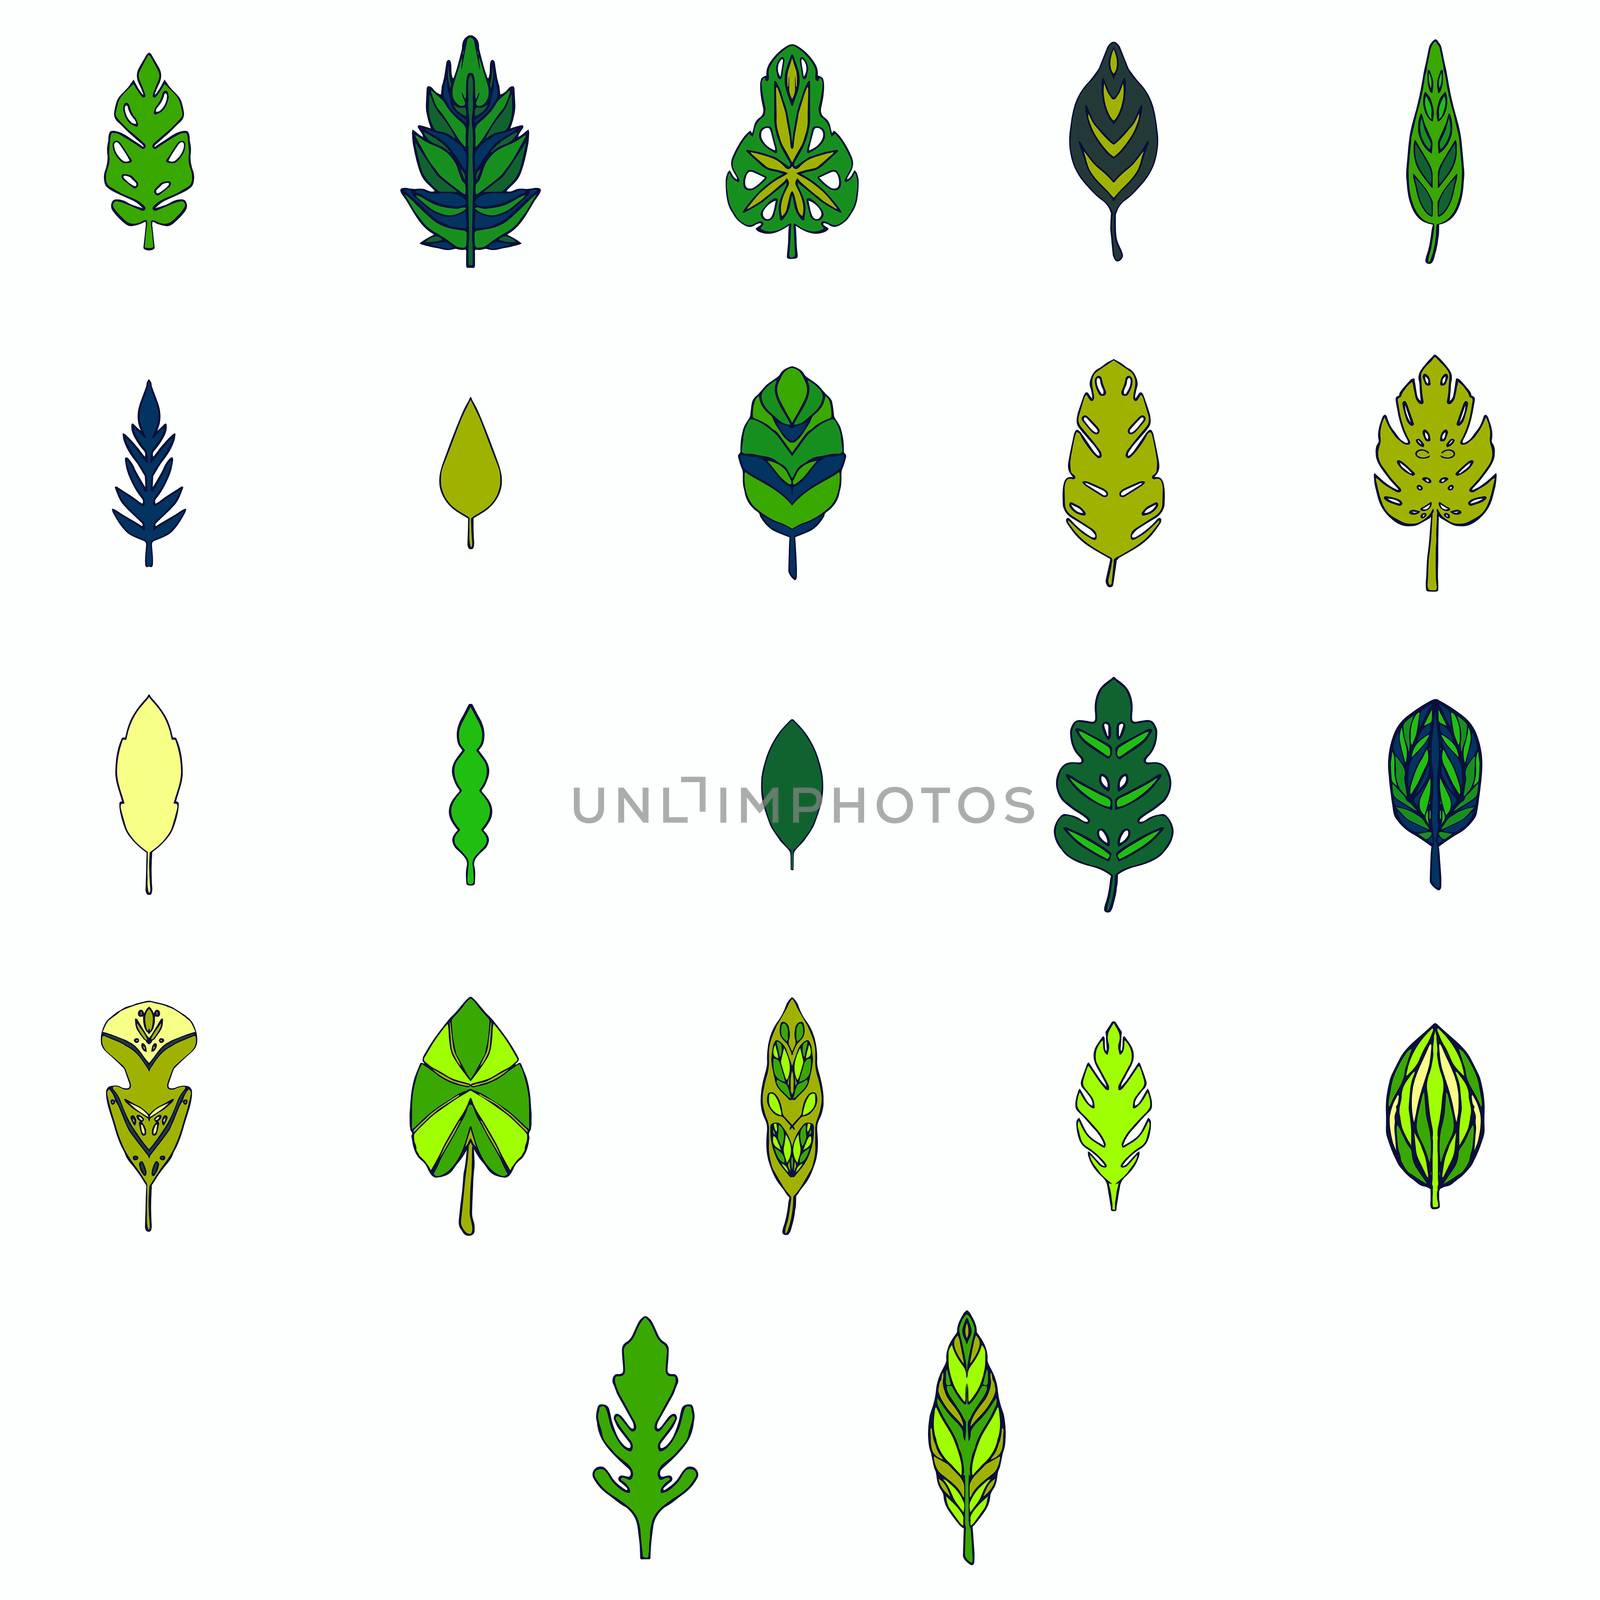 Vector icon of various leaves against white background